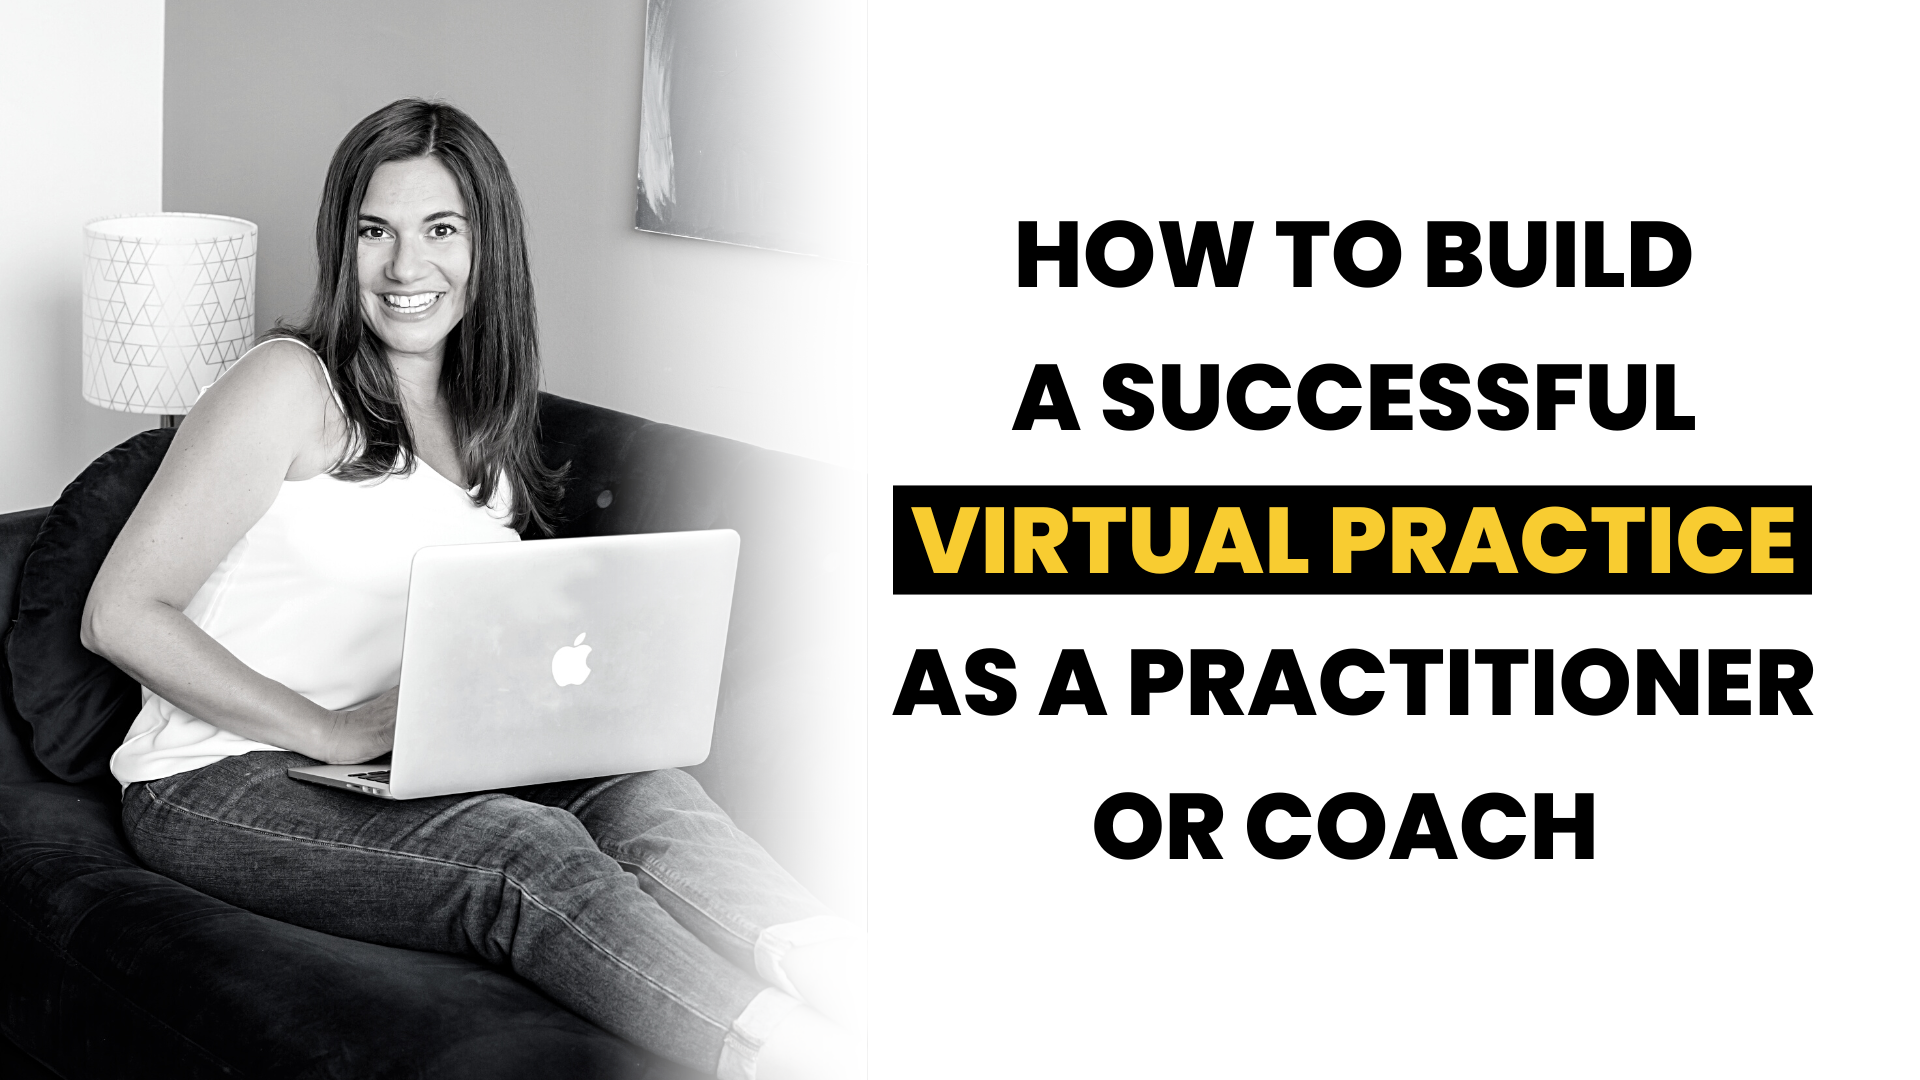 How to build a successful virtual practice as a practitioner or coach